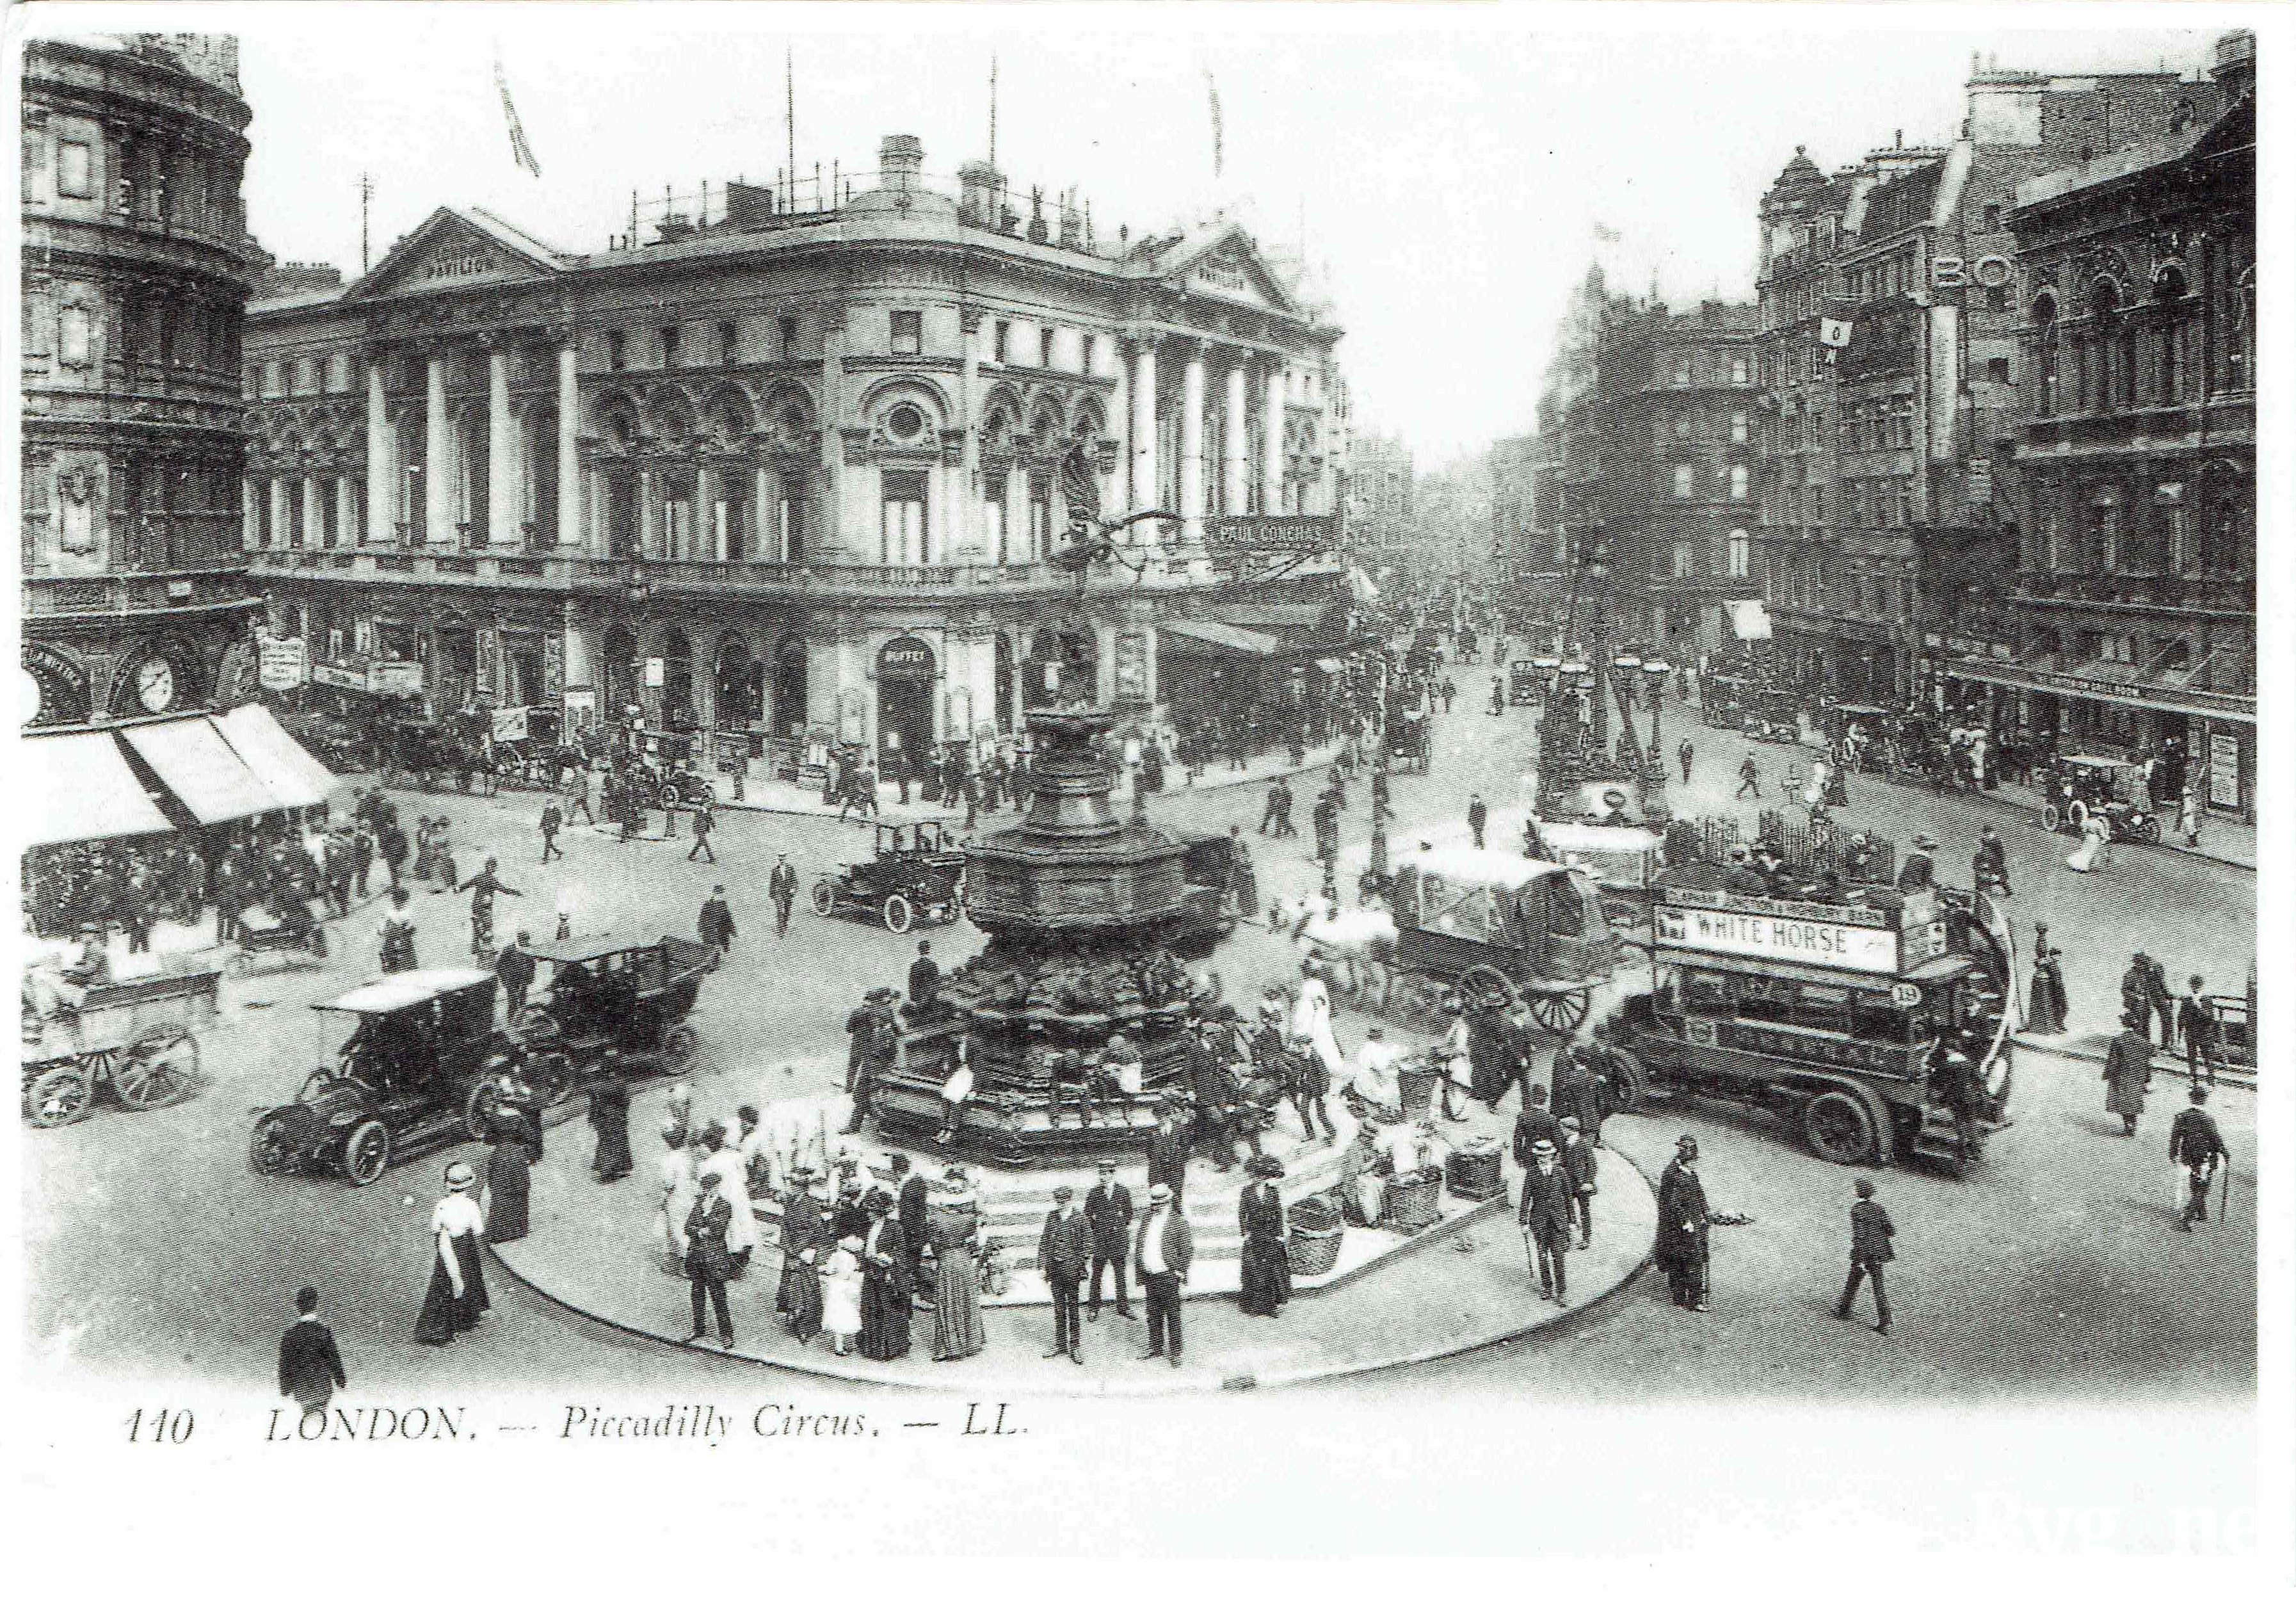 A bustling street junction, with a fountain surmounted by a winged statue in the centre of a roundabout. There are people sitting on the fountain's edge, women and men are standing by the steps, and walking along the pavements. Trams, horses pulling carts, and cars are passing by. The back of the postcard reads: ‘In this view c1908 the flower girls can be seen on the steps to the right of Eros’.